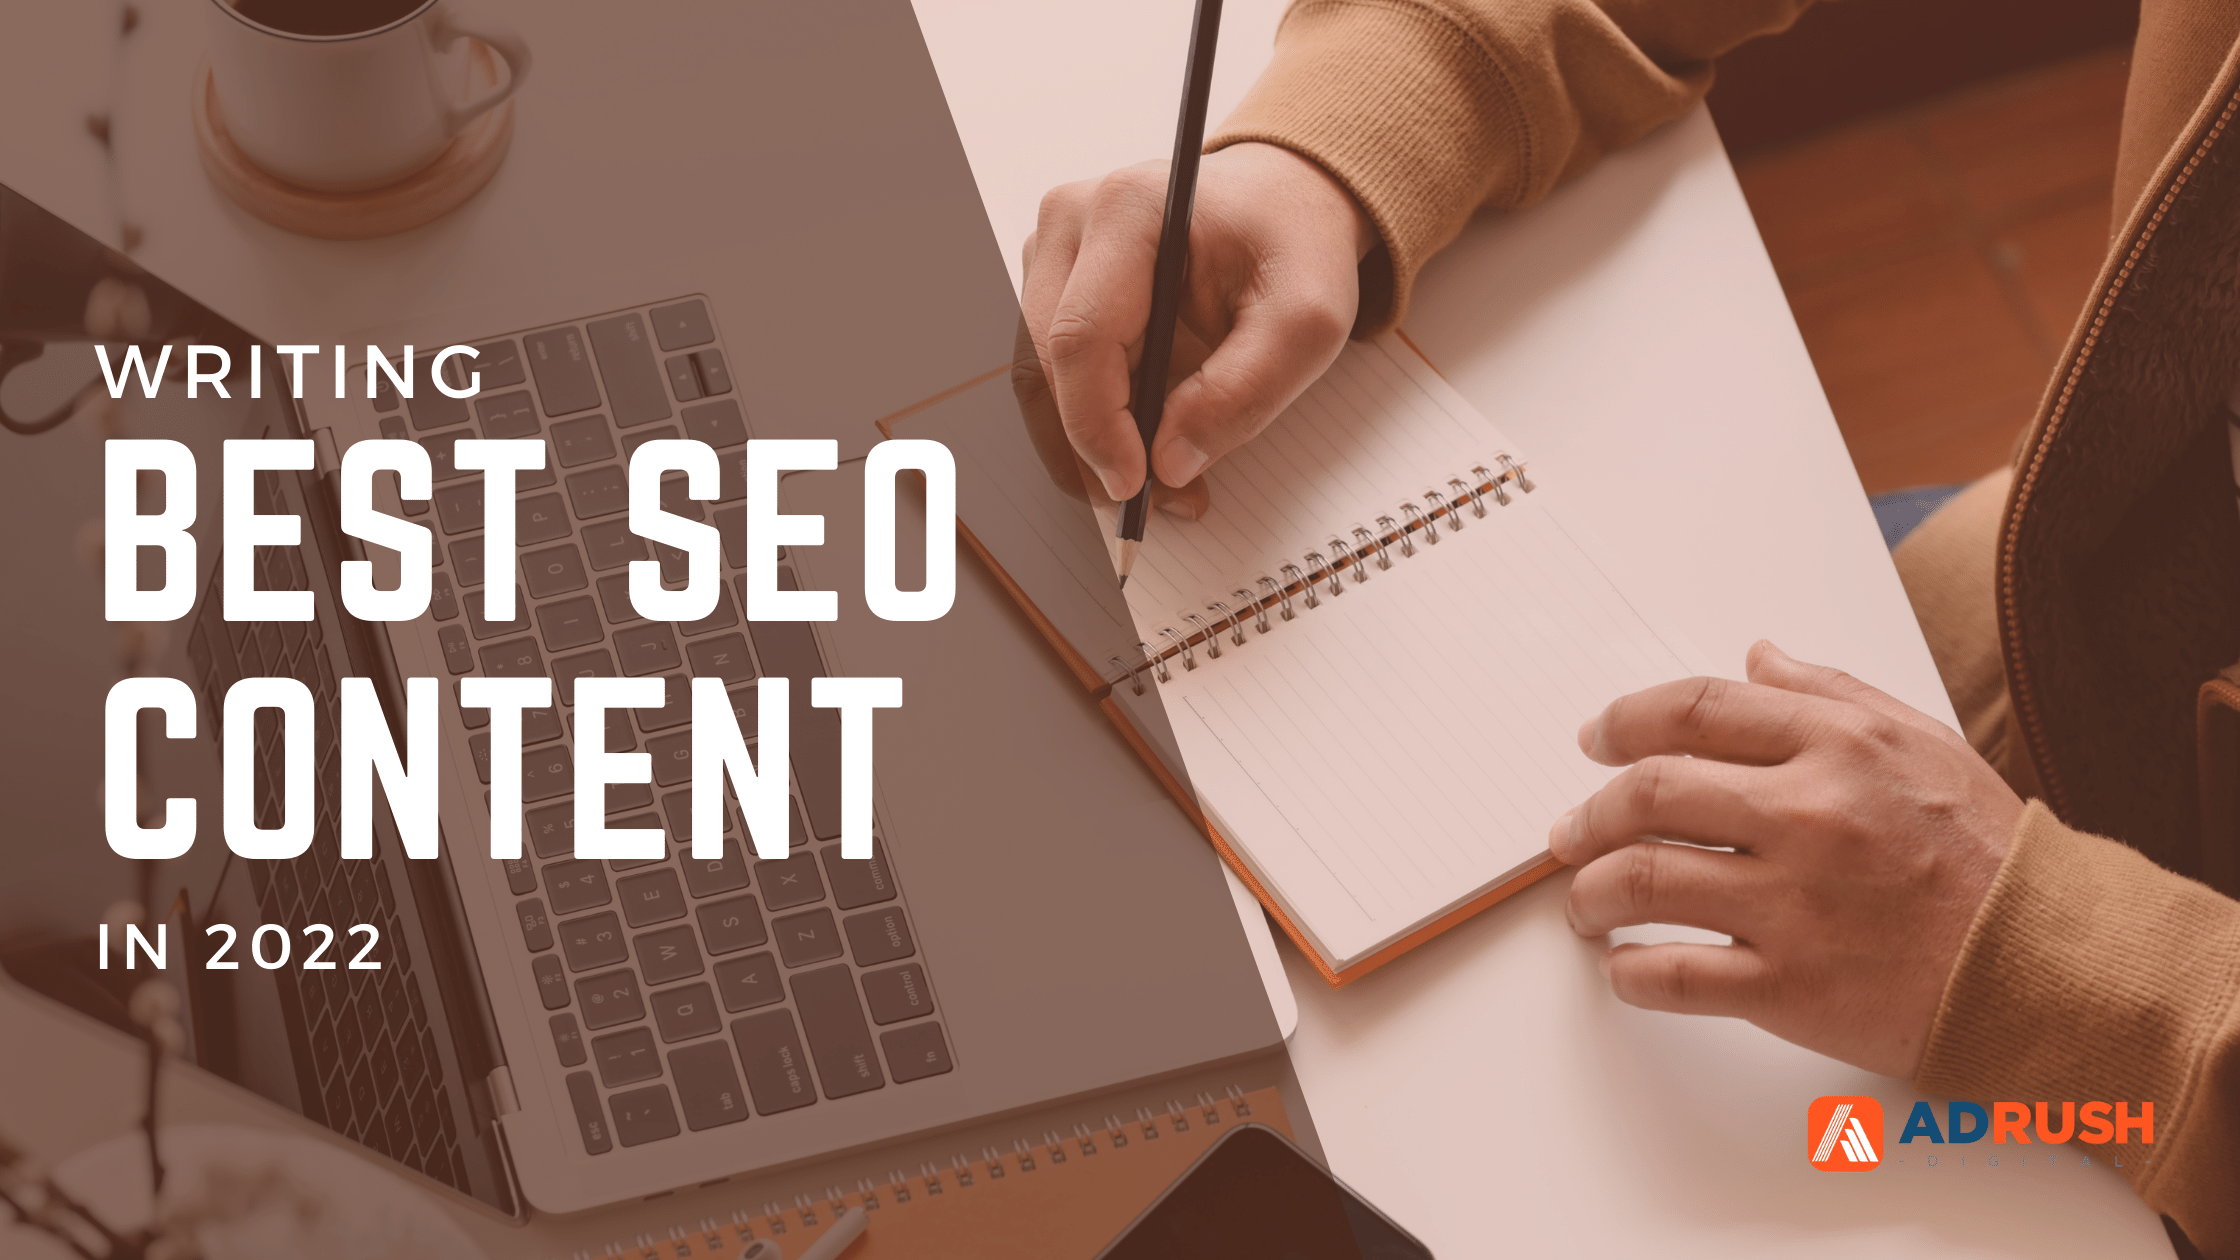 Writing Best SEO Content In 2022